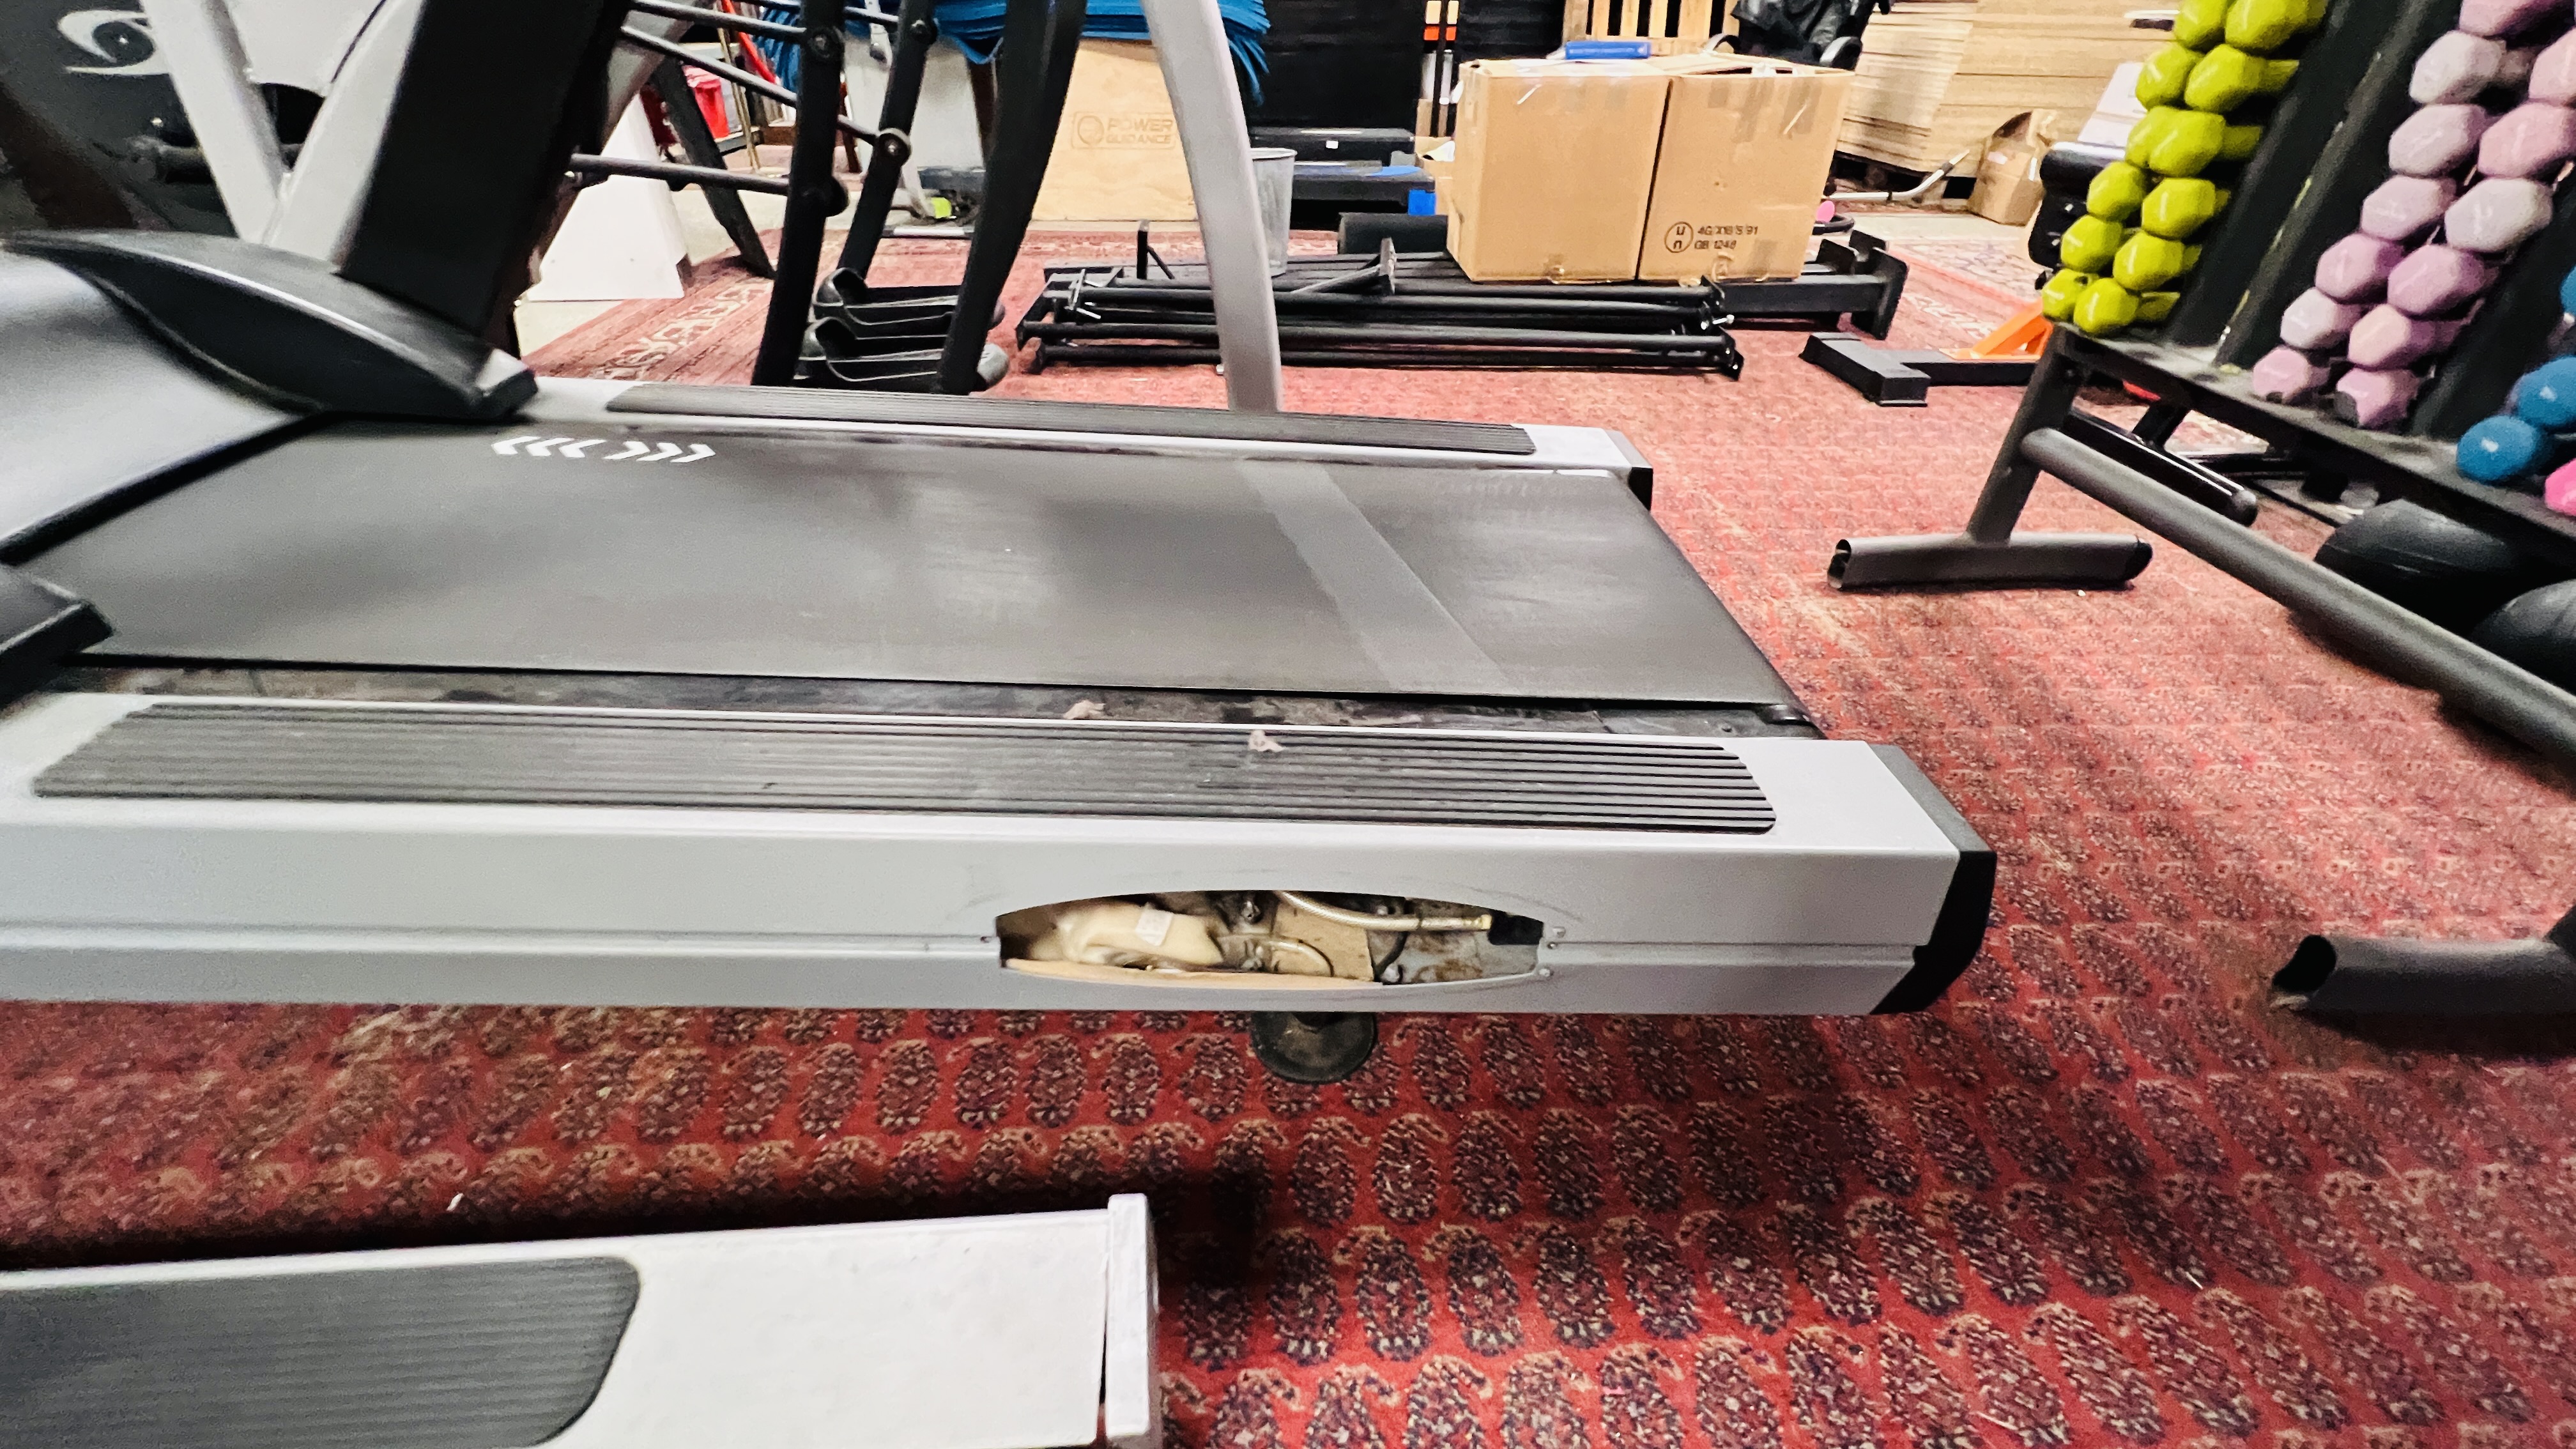 LIFE FITNESS 9500 HR PROFESSIONAL GYM TREADMILL - TRADE ONLY - SOLD AS SEEN - CONDITION OF SALE - - Image 11 of 17